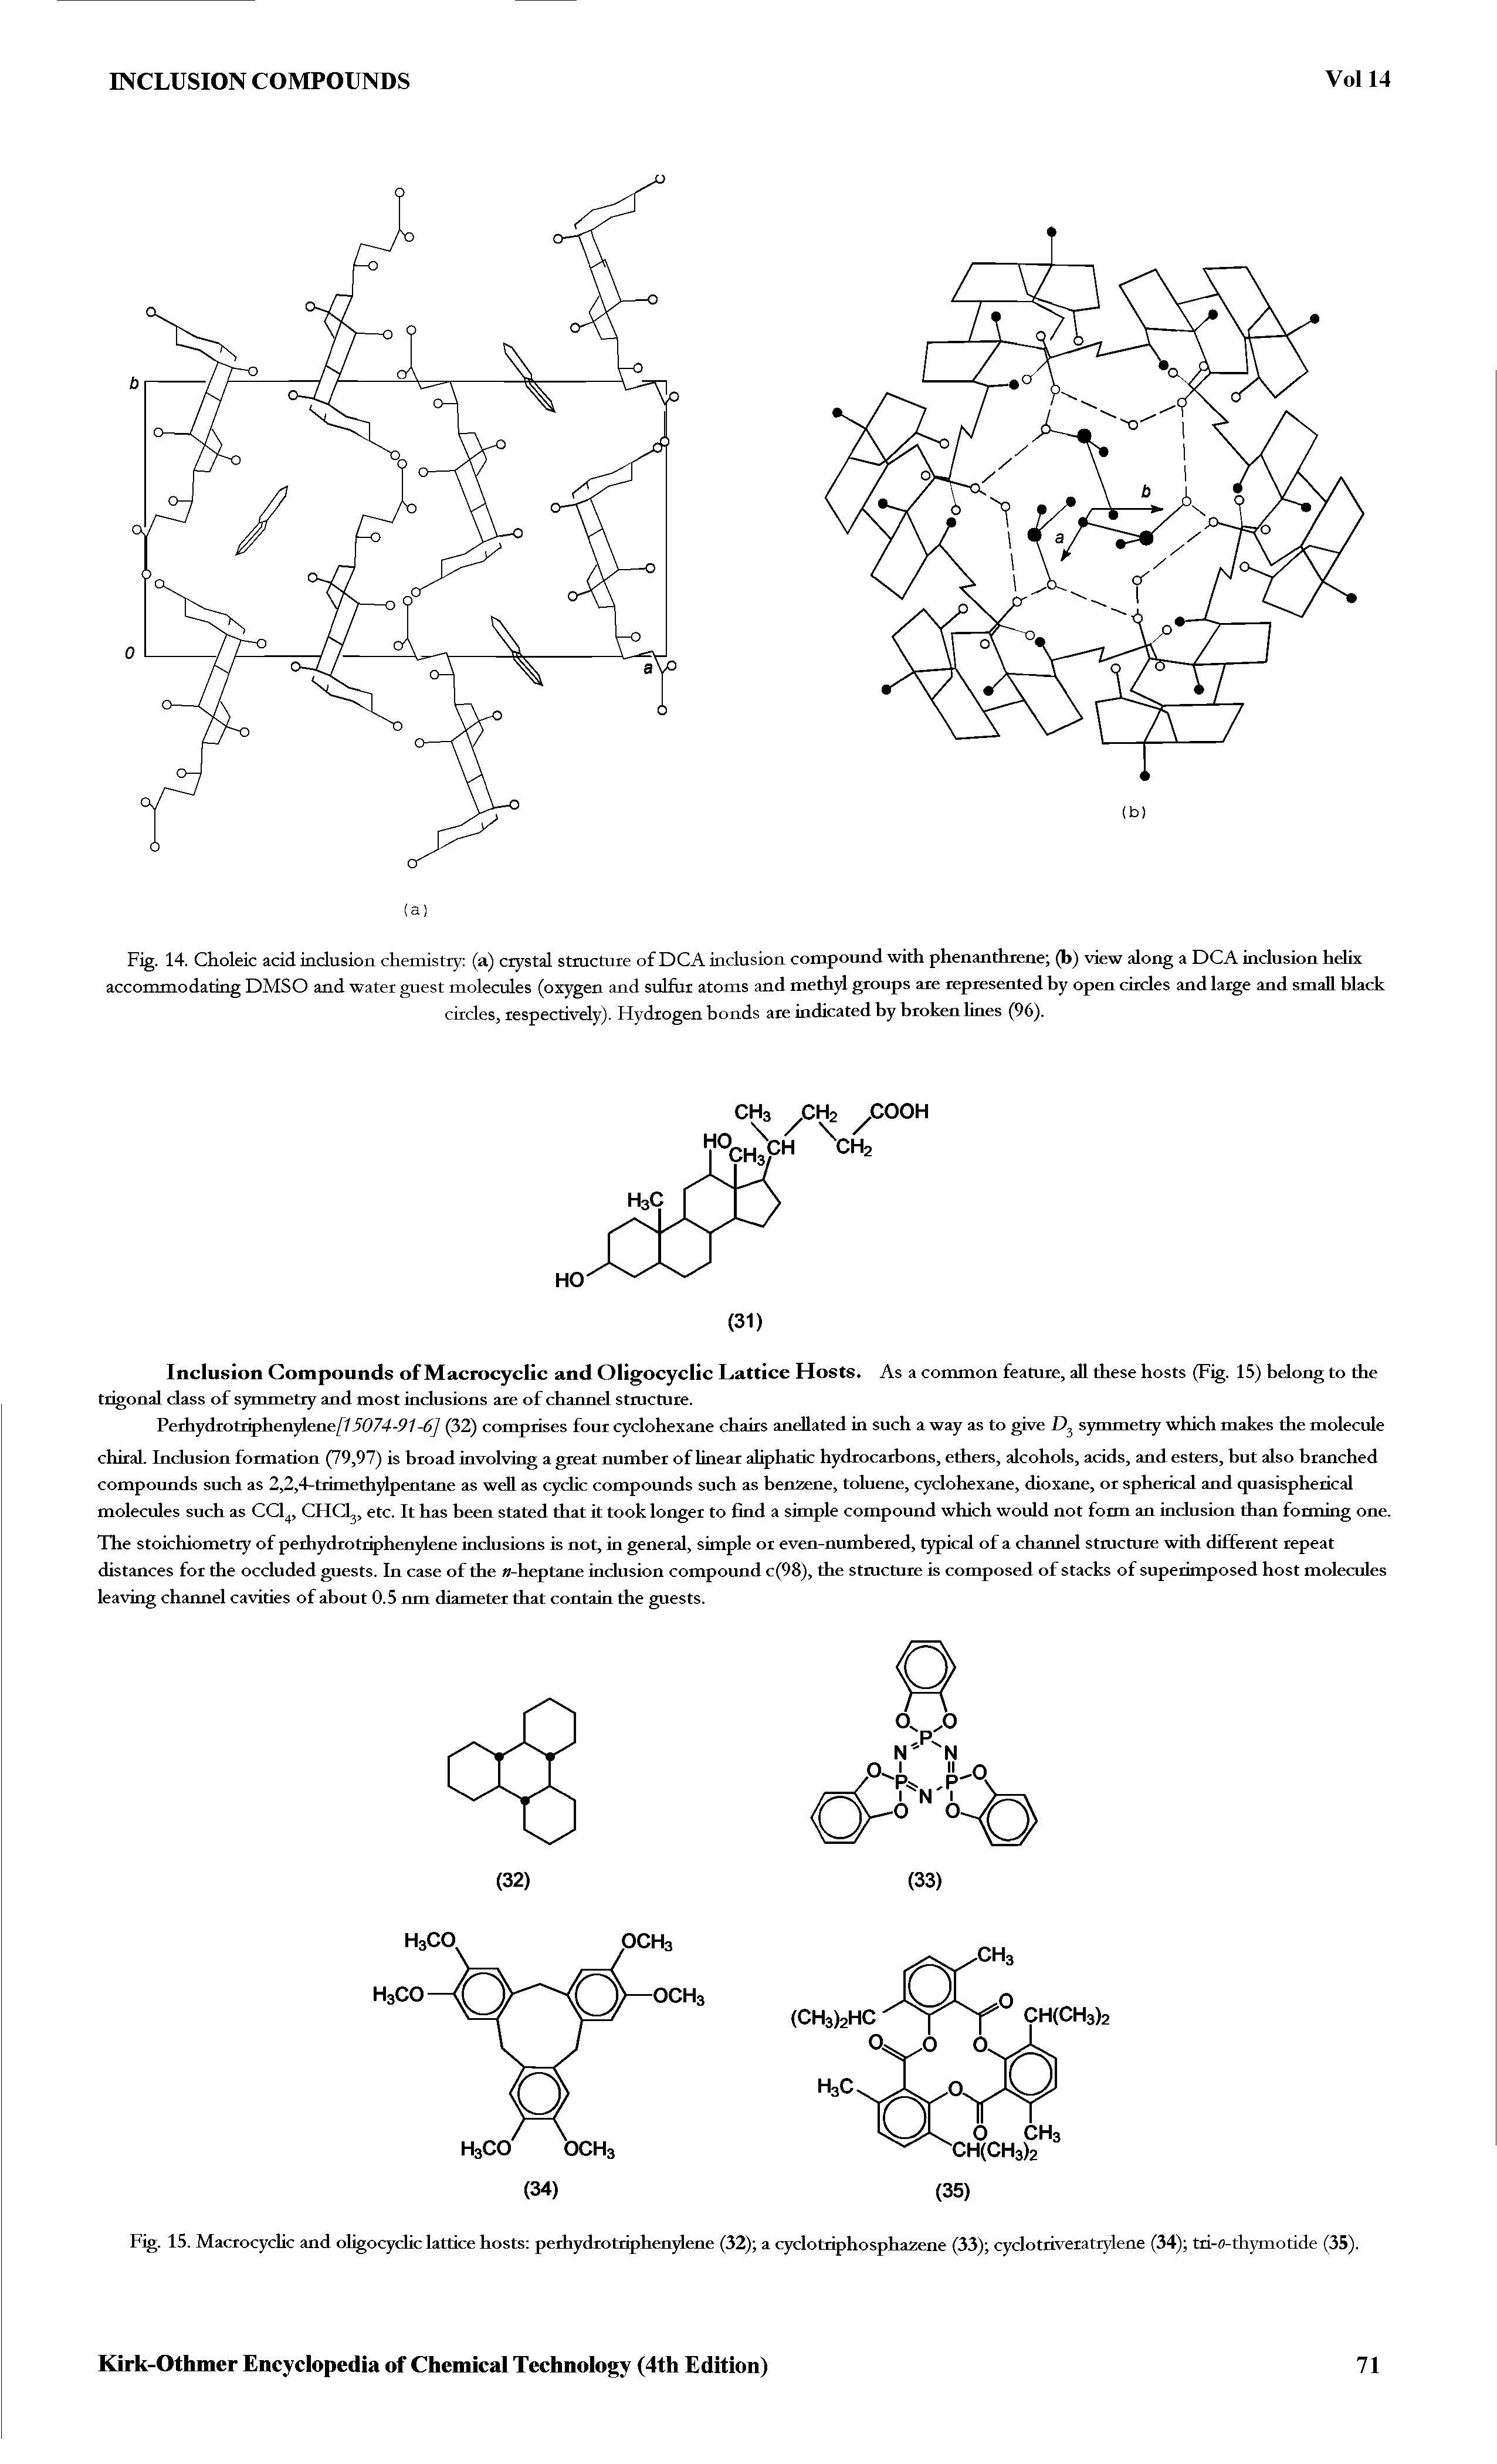 Fig. 14. Choleic acid inclusion chemistry (a) crystal structure of DCA inclusion compound with phenanthrene (b) view along a DCA inclusion helix accommodating DMSO and water guest molecules (oxygen and sulfur atoms and methyl groups are represented by open circles and large and small black...